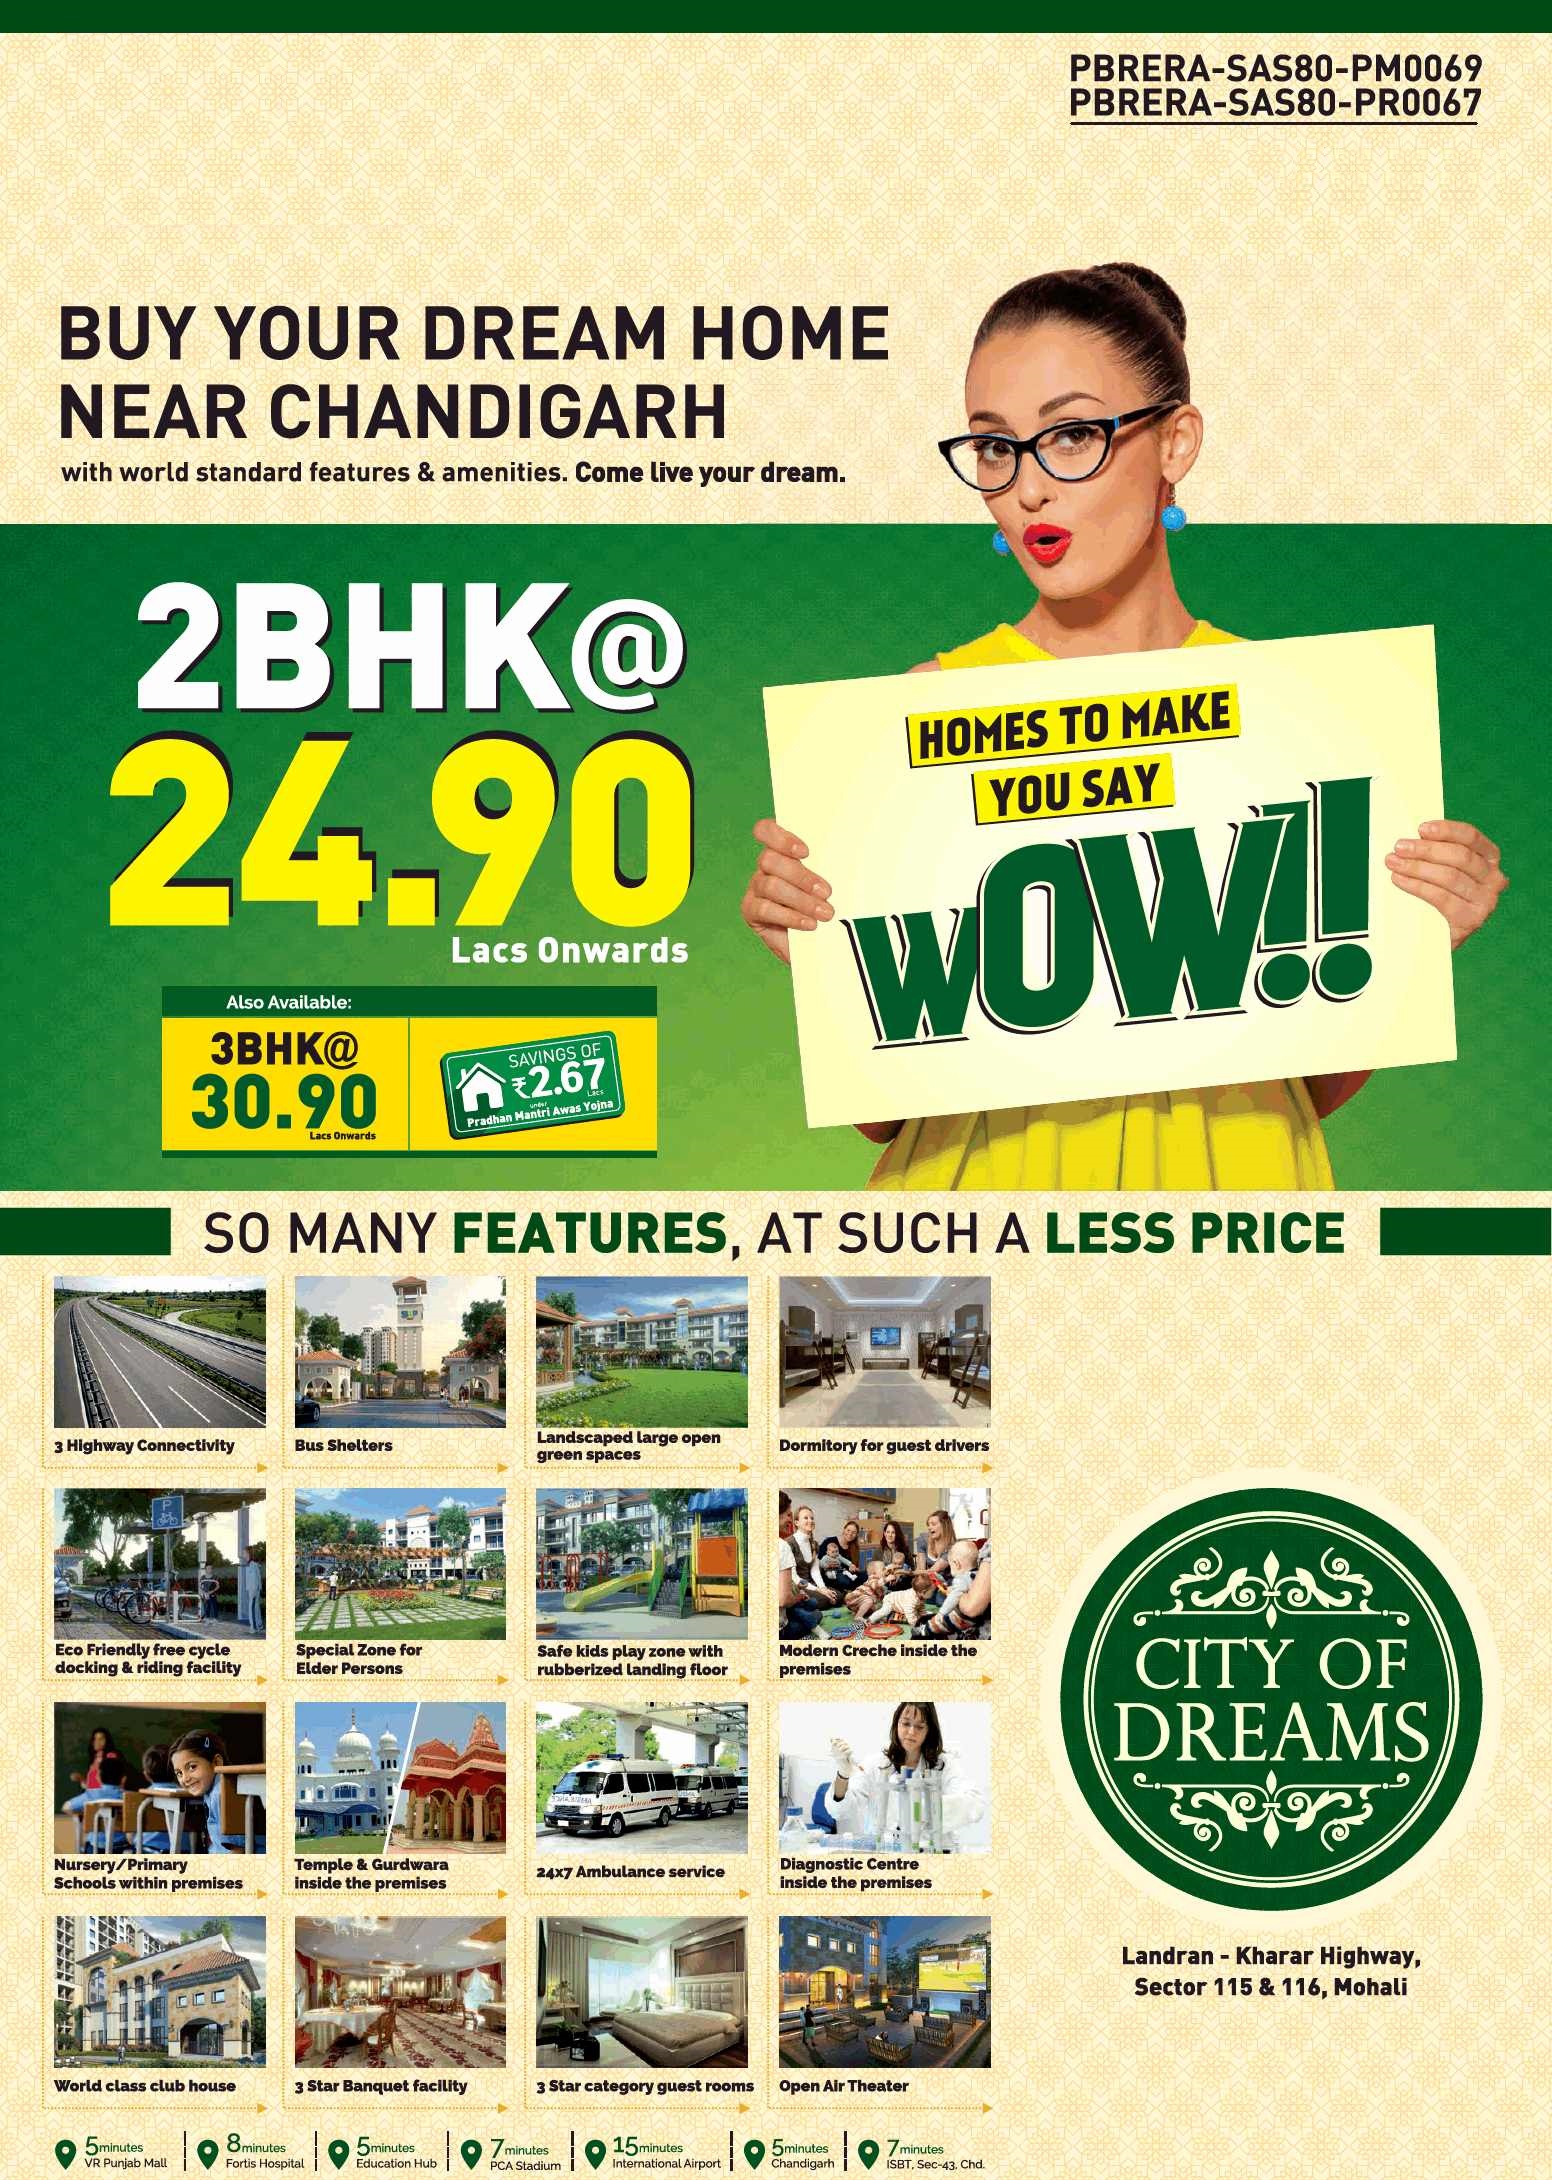 Book your dream home with worlds standard features & amenities at SBP City of Dreams in Mohali